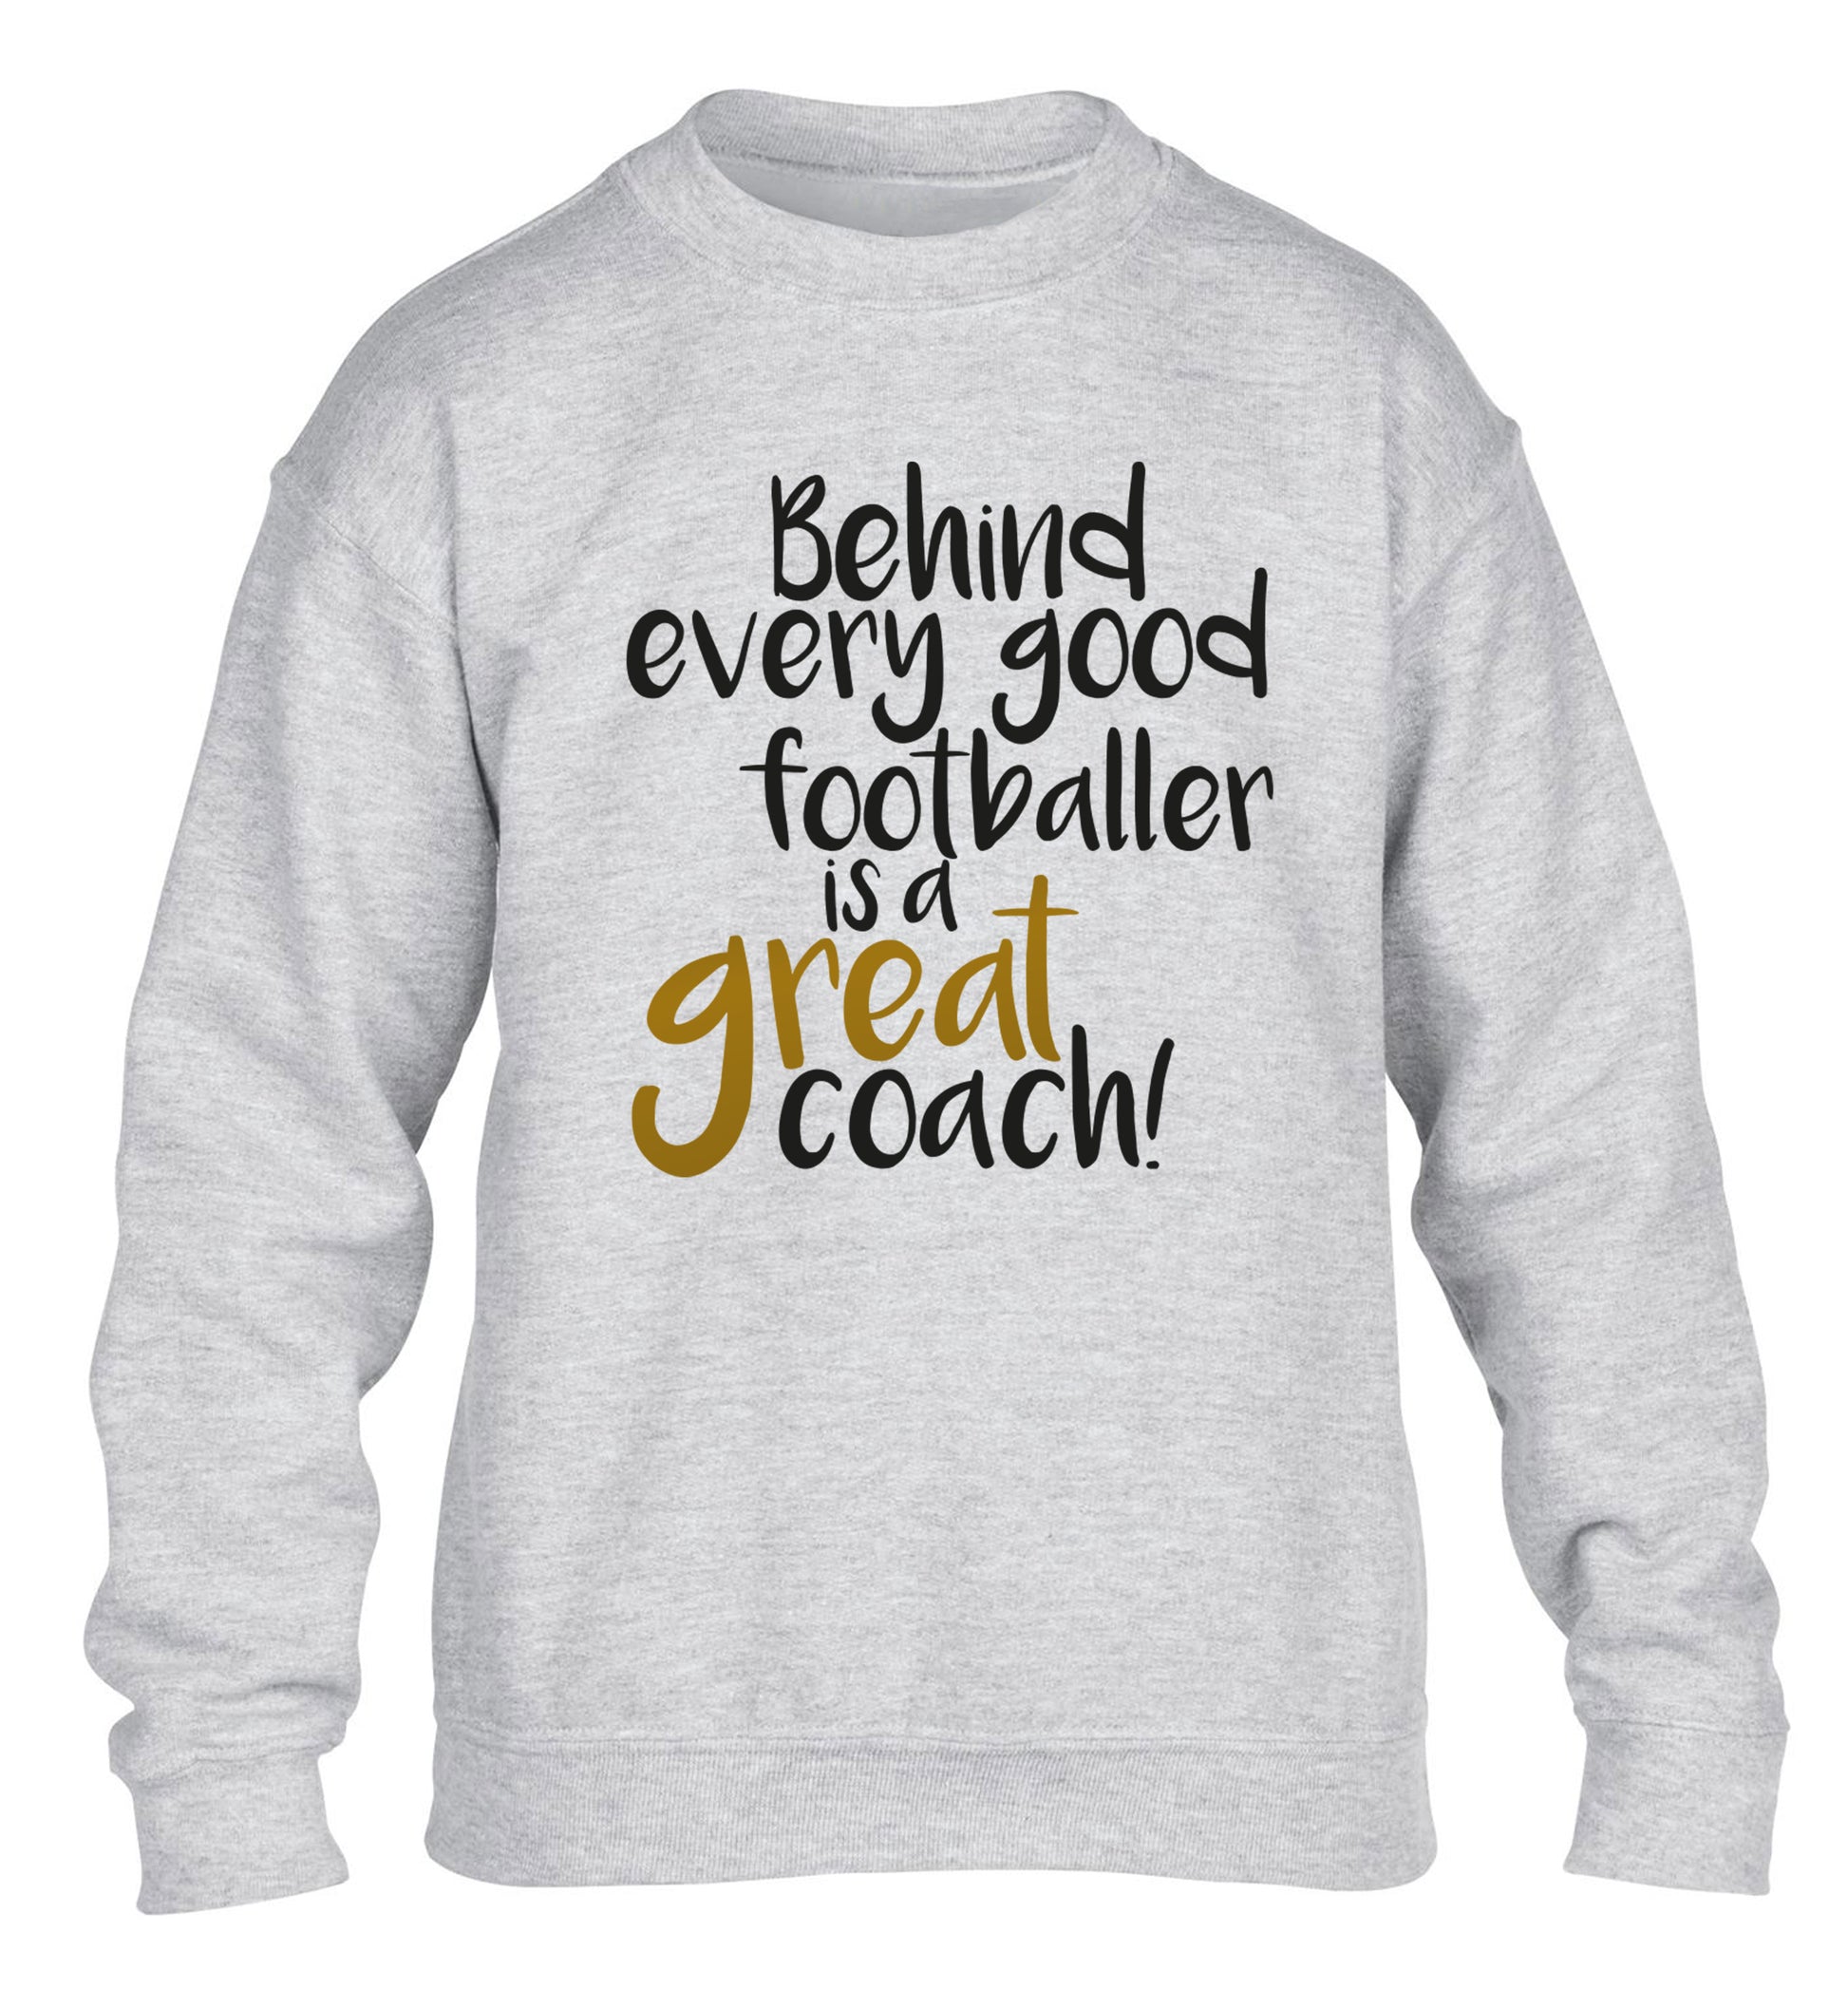 Behind every good footballer is a great coach! children's grey sweater 12-14 Years